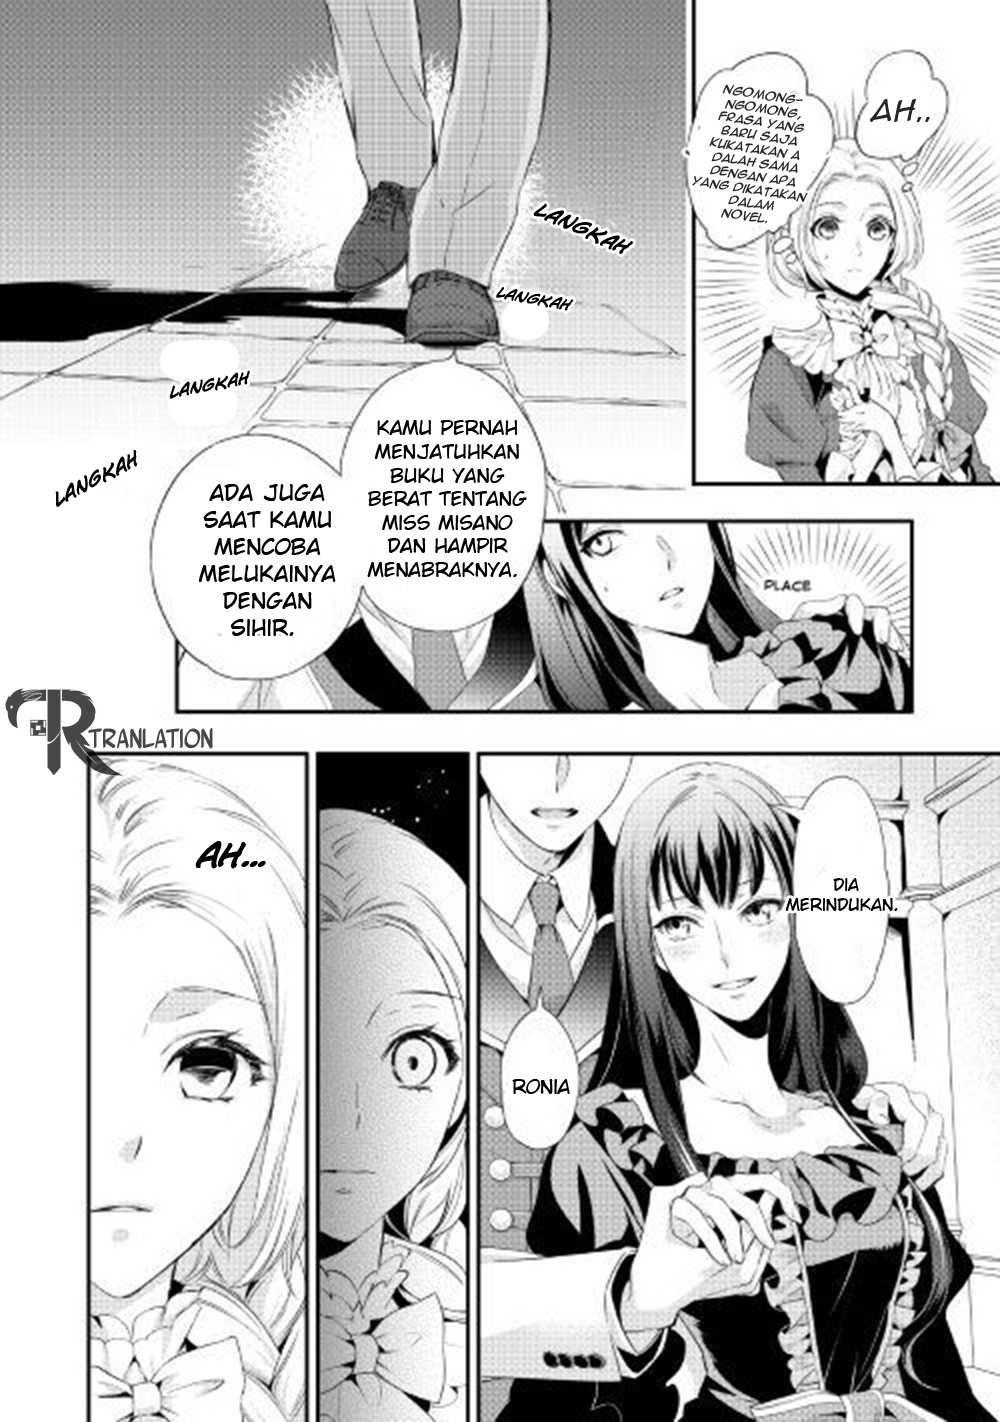 Milady Just Wants to Relax Chapter 01 11